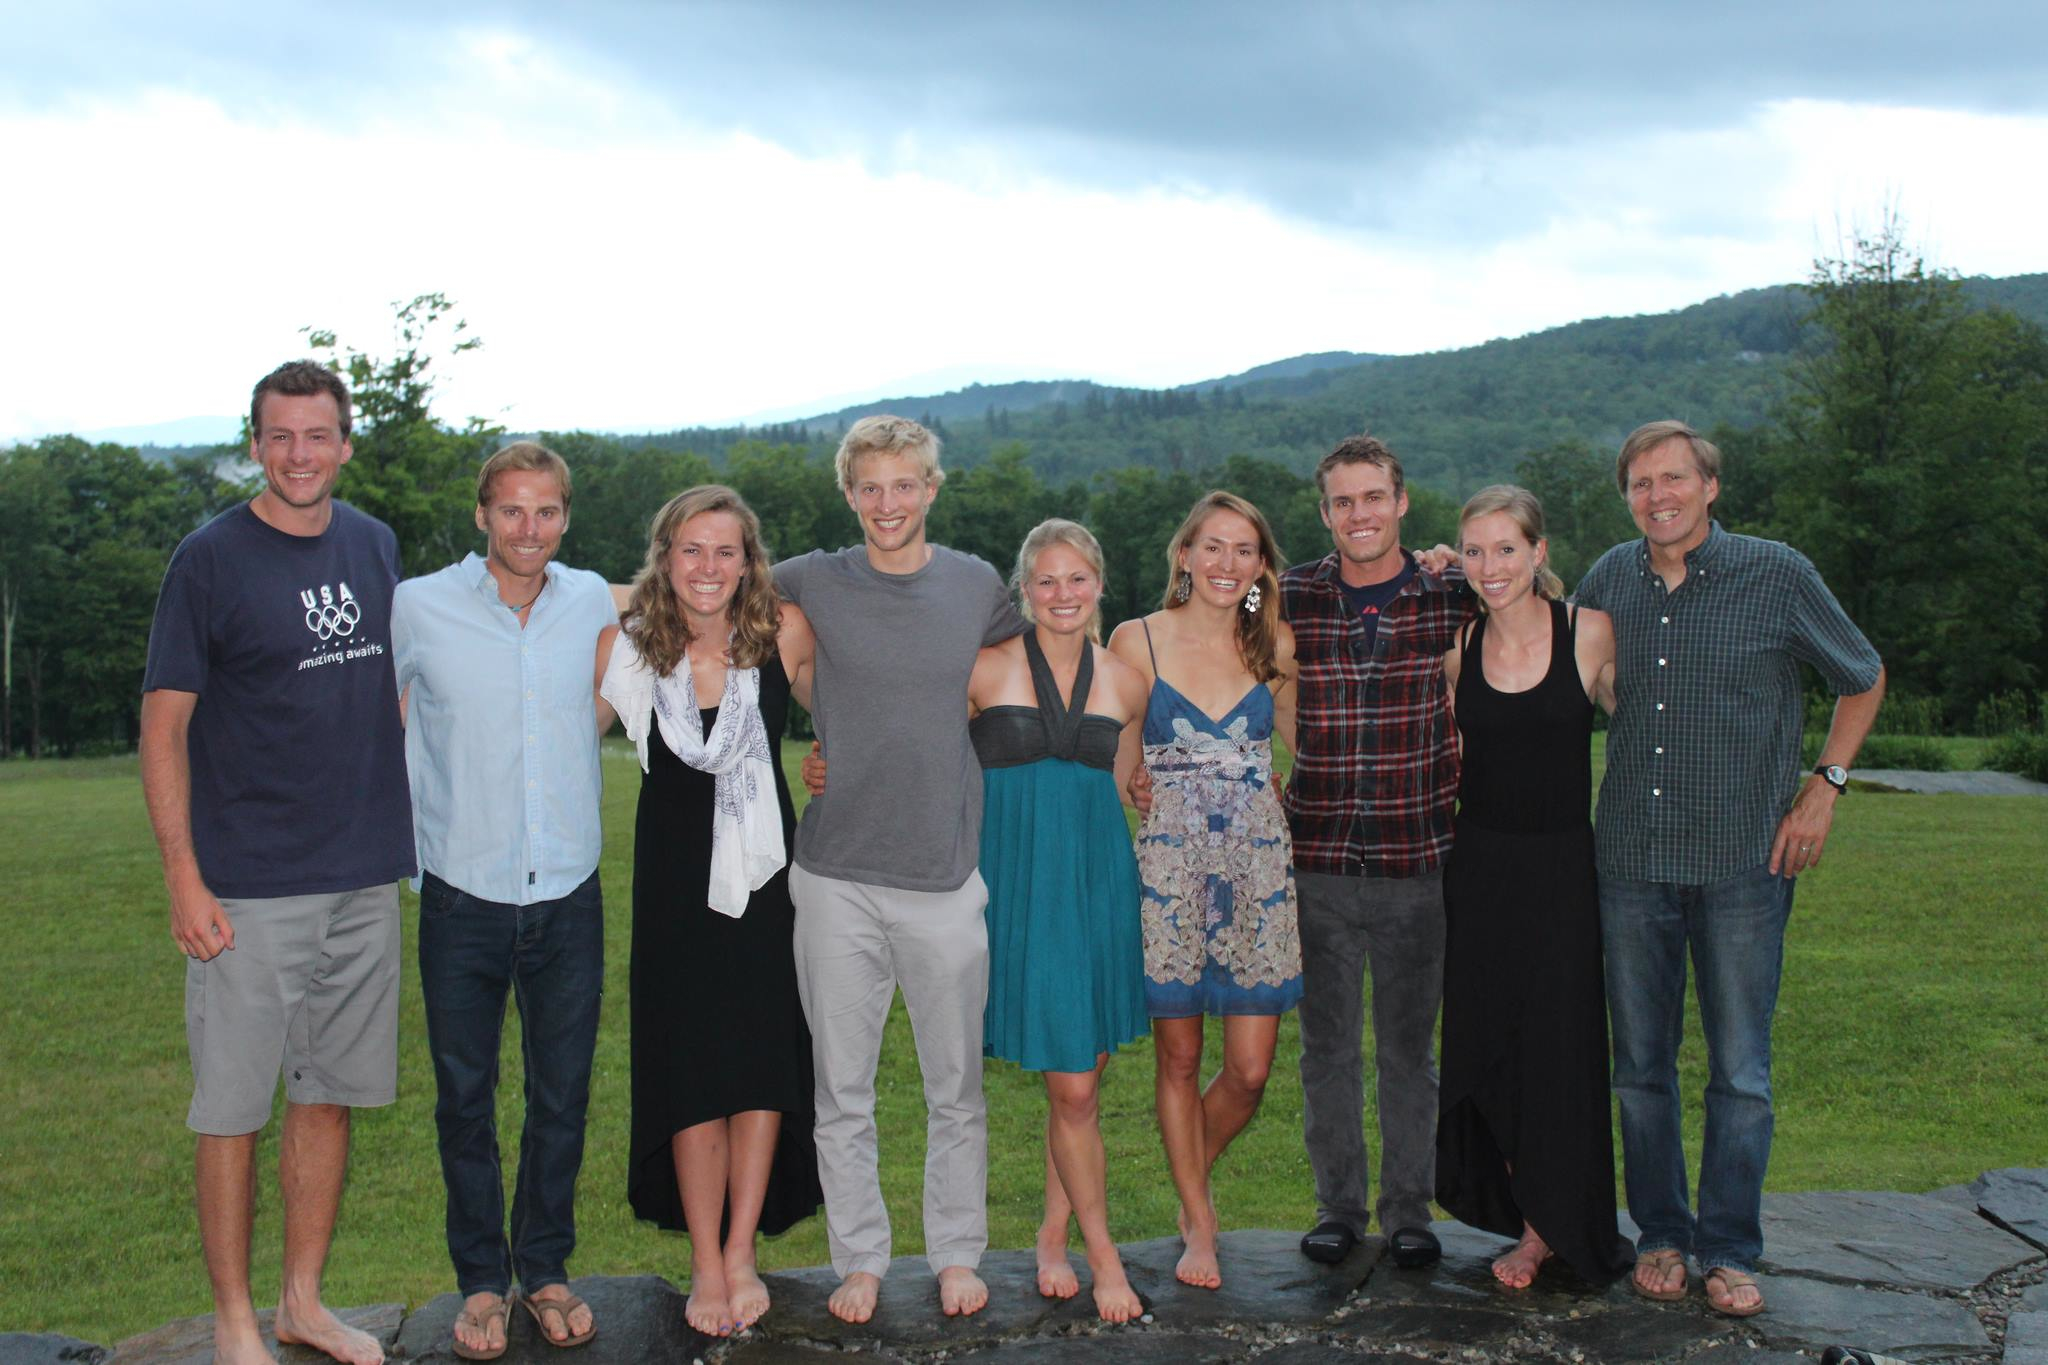 The 2013/2014 Stratton Mountain School T2 Team (from left to right): Head coach Gus Kaeding, Andy Newell, Annie Pokorny, Eric Packer, Jessie Diggins, Sophie Caldwell, Simi Hamilton, Erika Flowers, and nordic program director Sverre Caldwell. (Photo: Annie Hart)